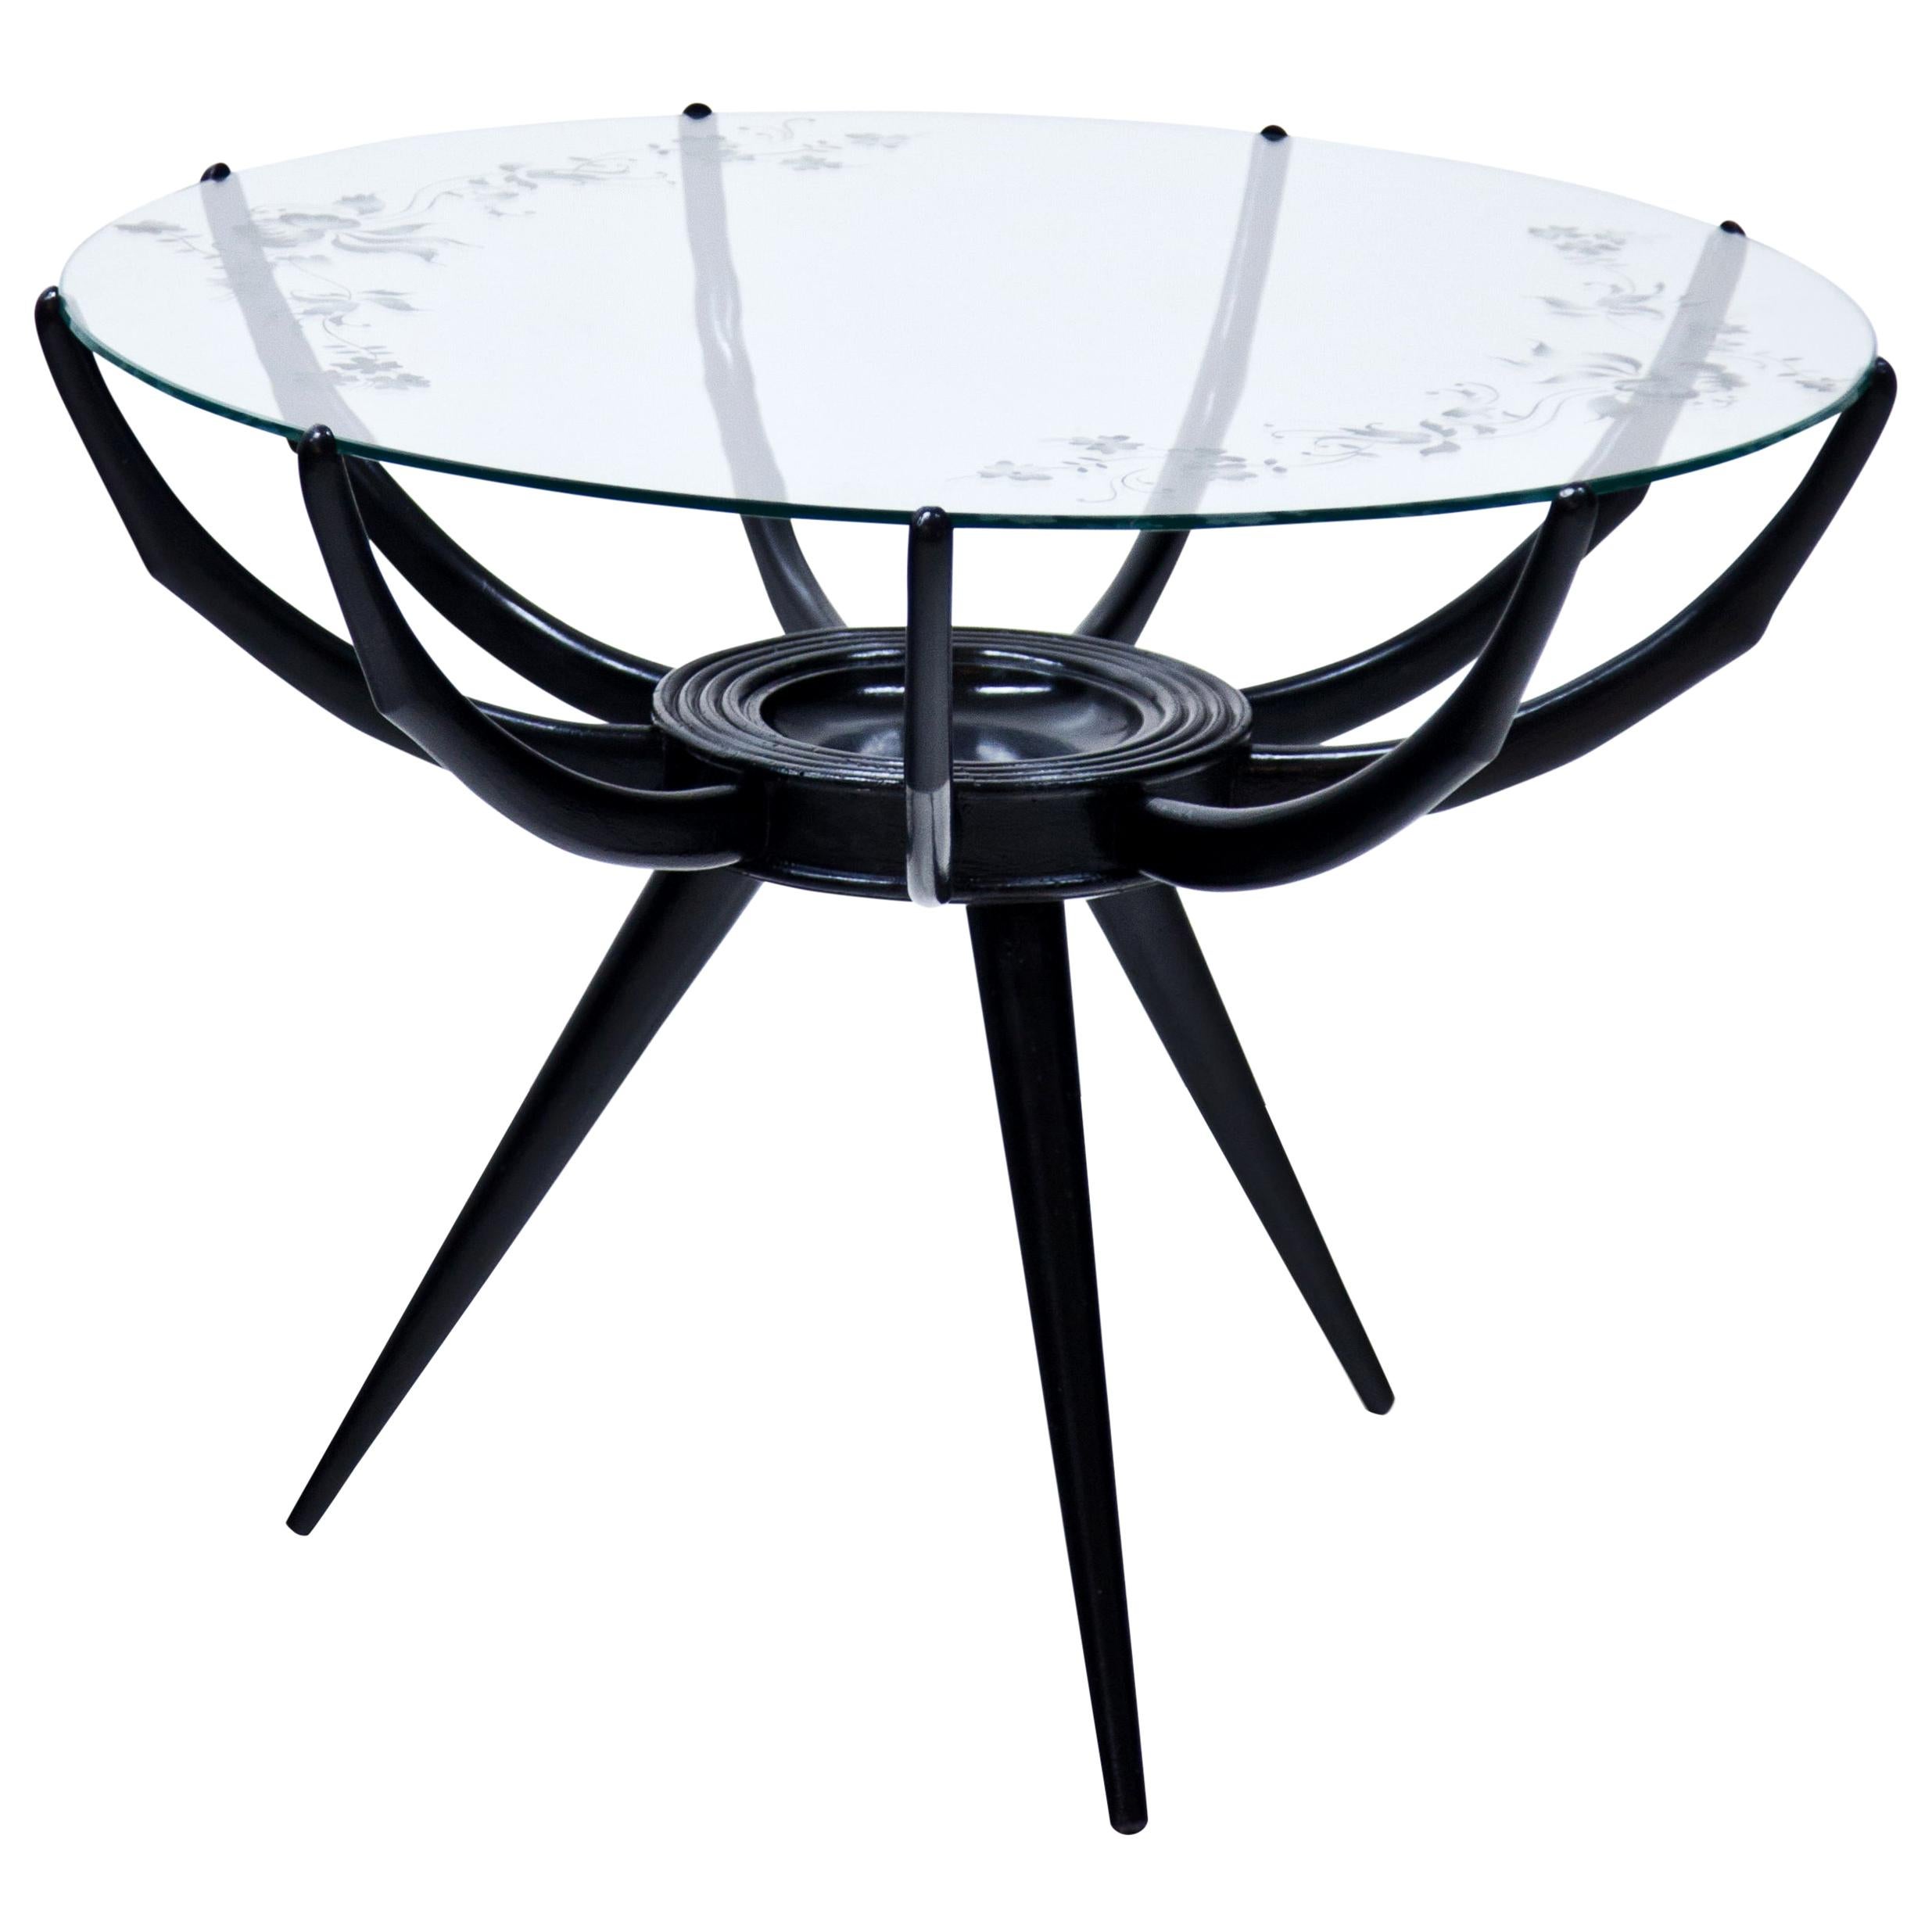 Black Carlo de Carli‚ Spider Coffee Table with Glass Top, Italy, 1950s